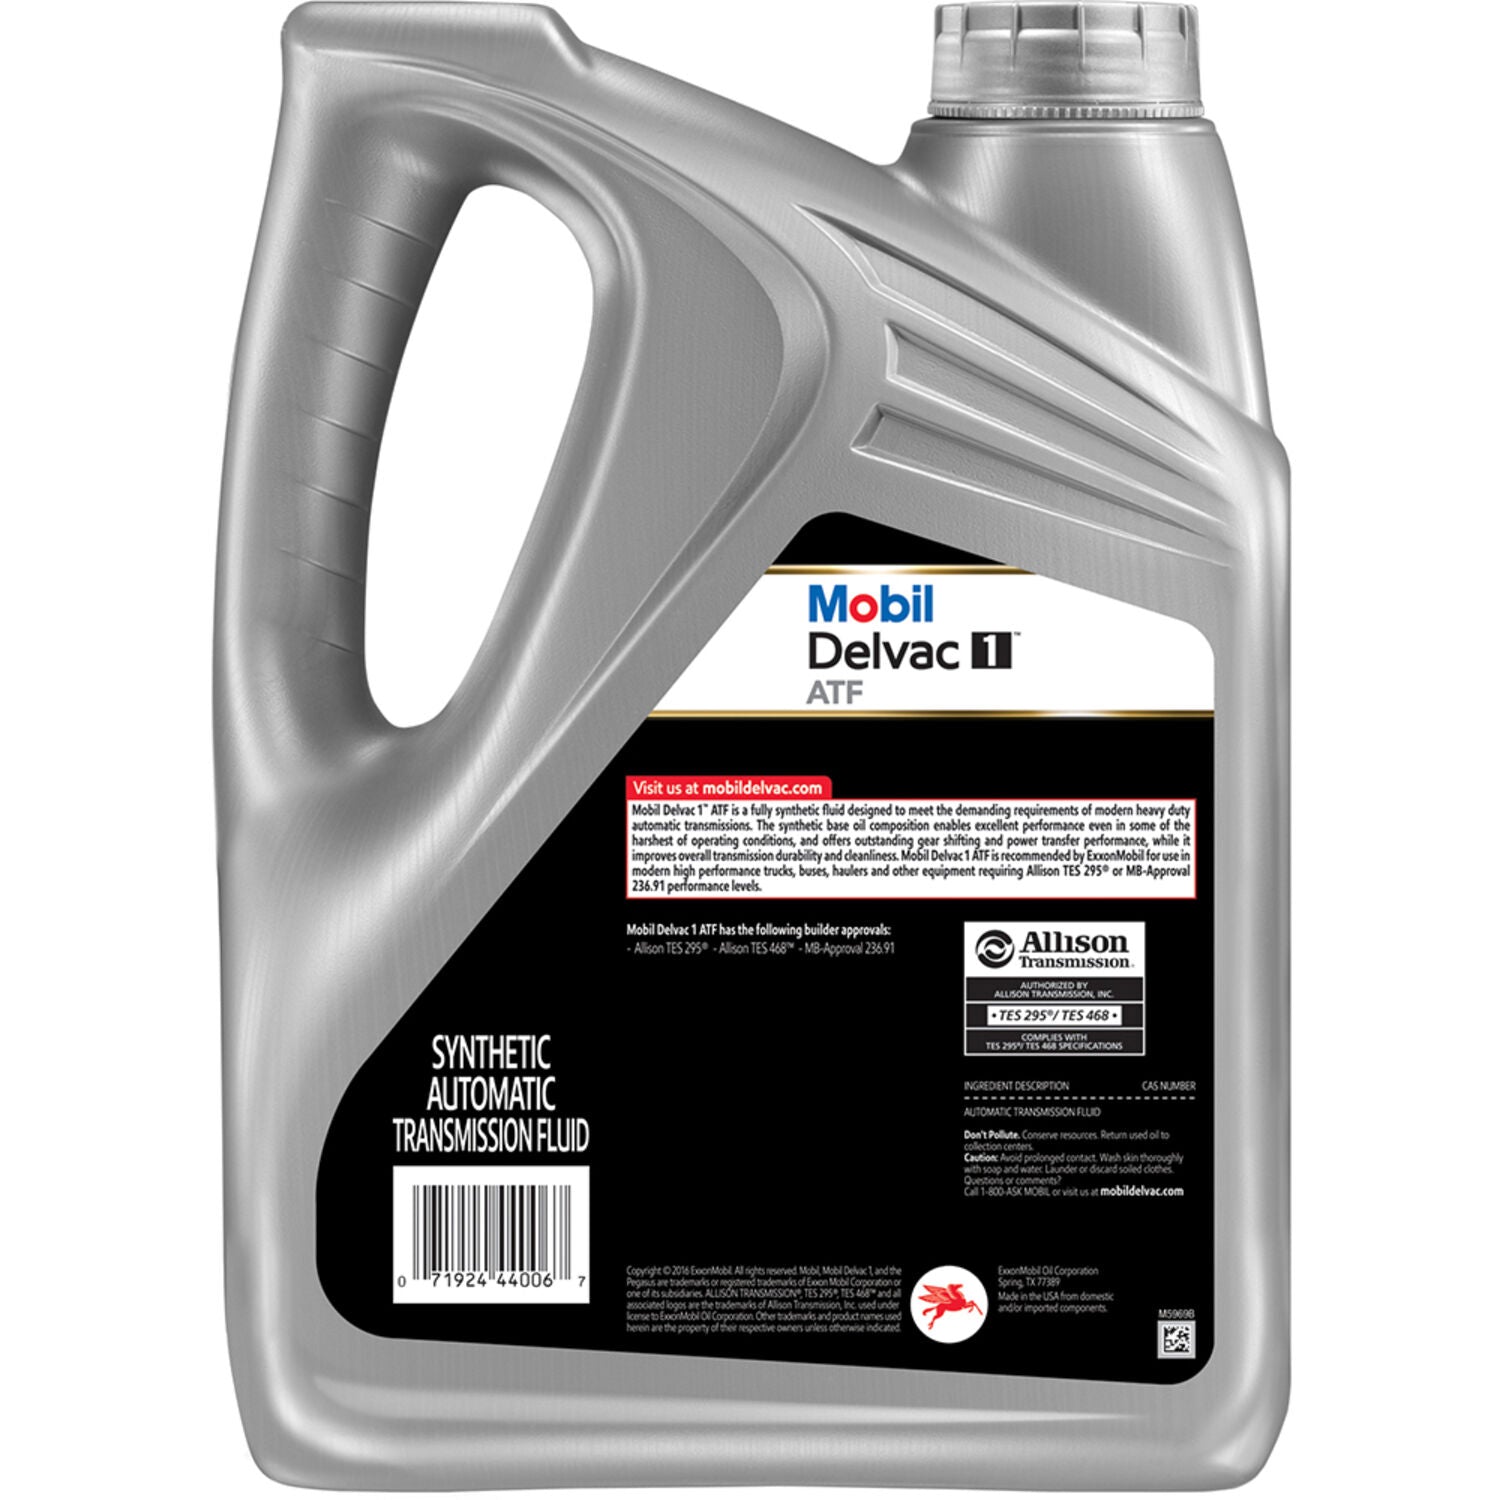 MOB 44006 Mobil Delvac 1 ATF Full Synthetic (1 Gal)